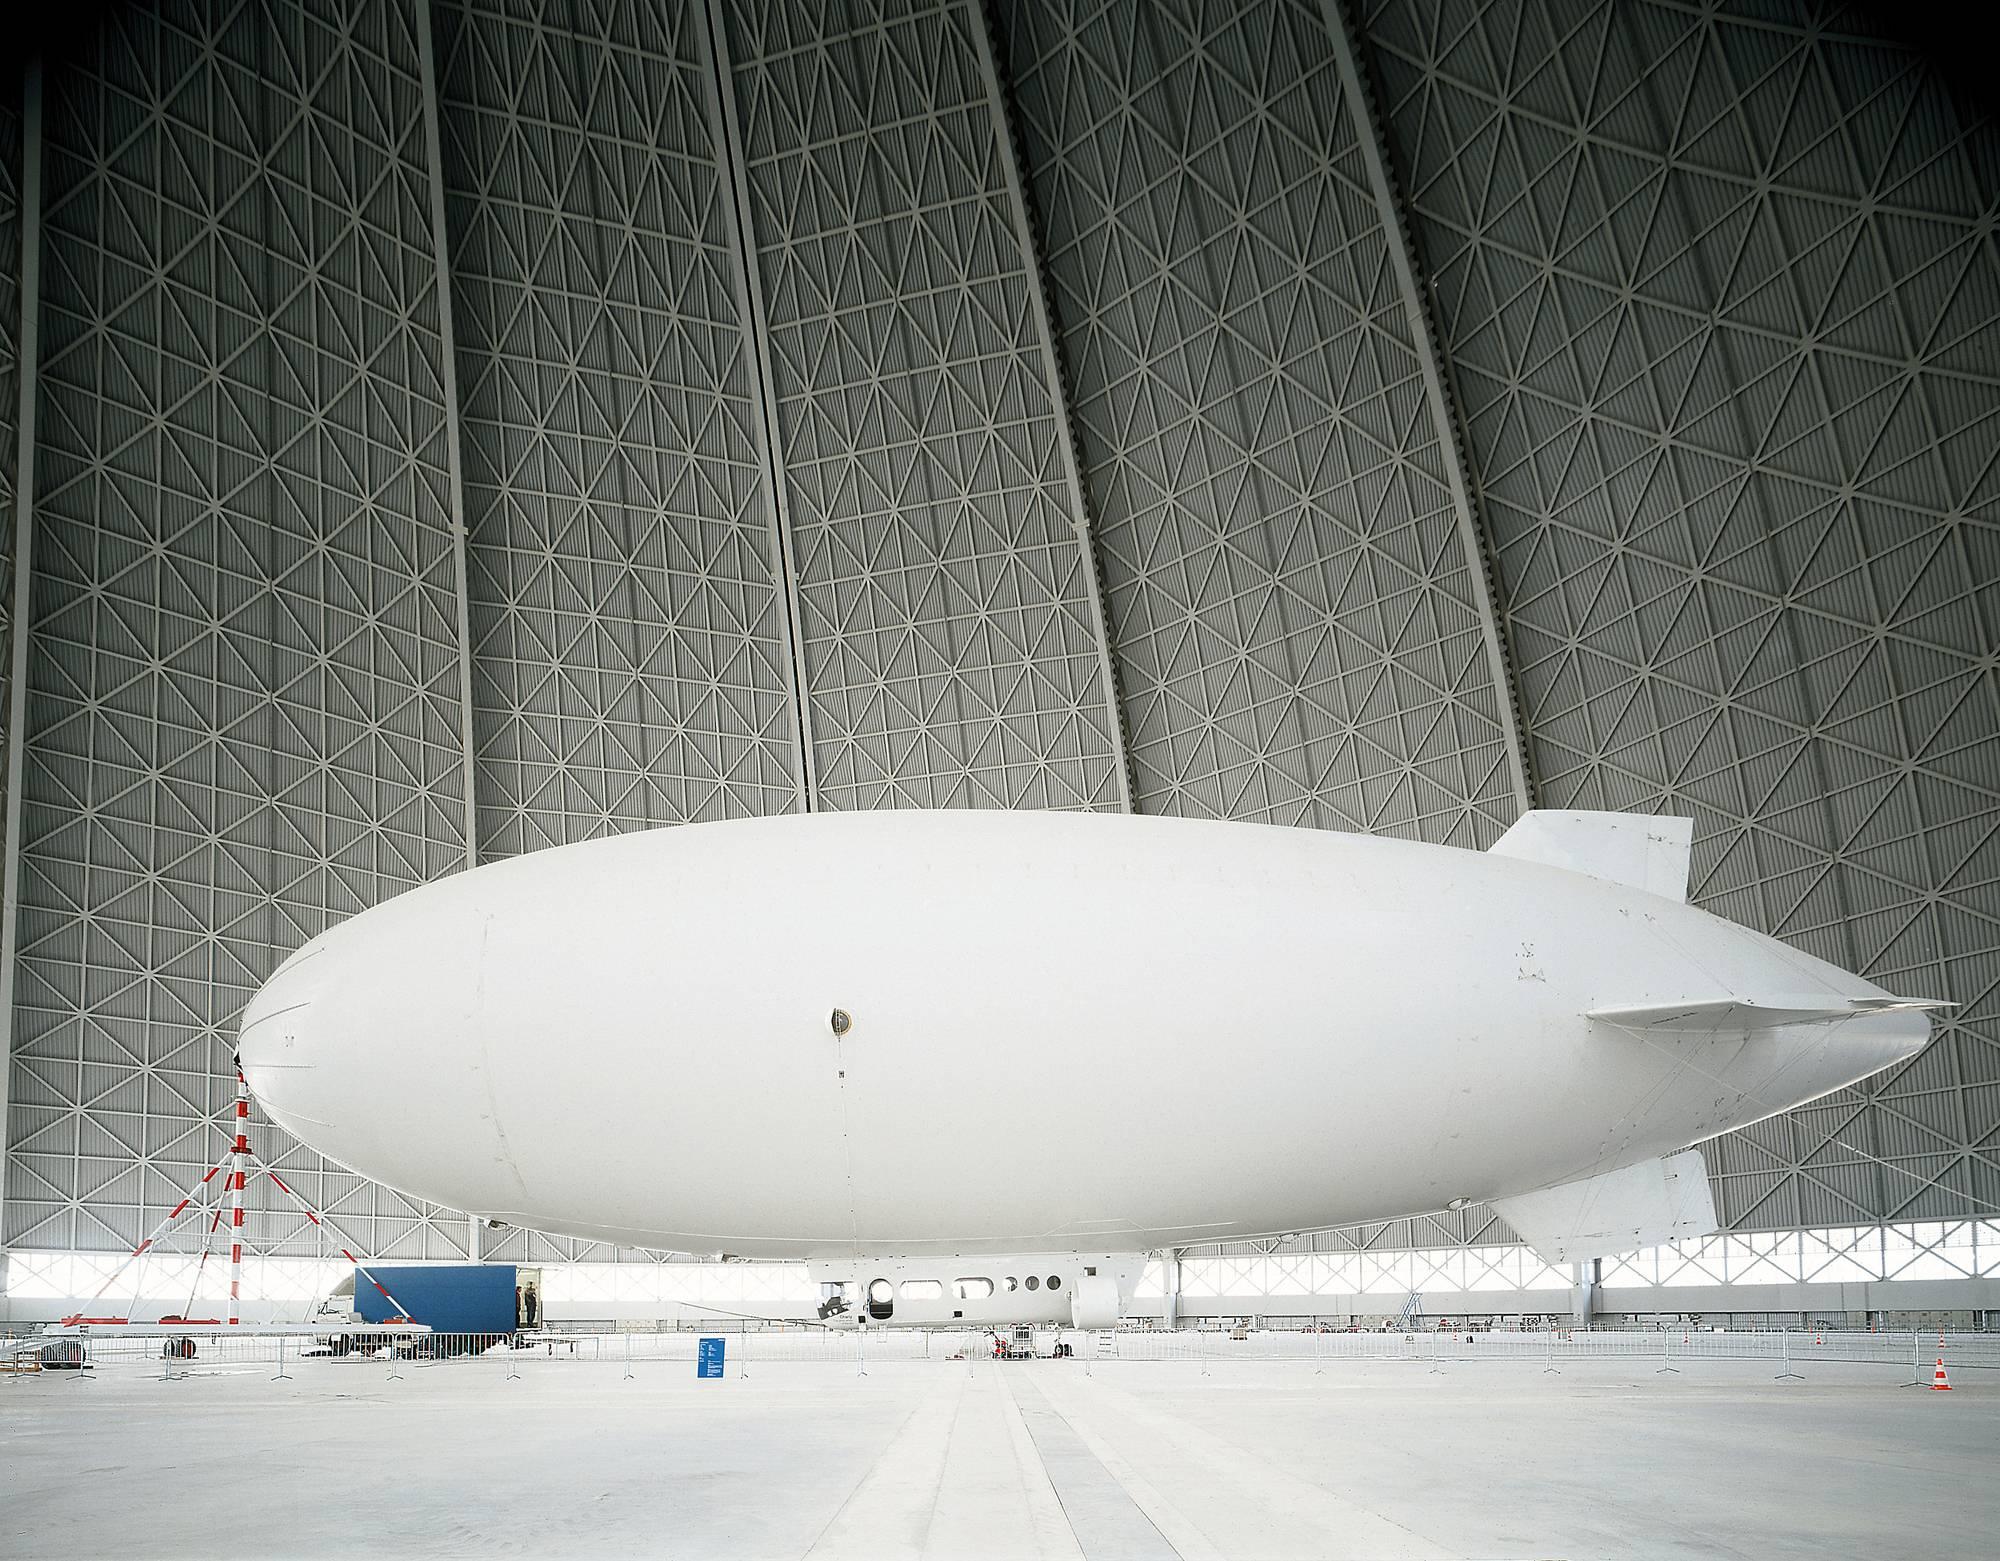 Christian Stoll Color Photograph - Zeppelin (framed) - monumental photograph of iconic pioneering airship in hangar